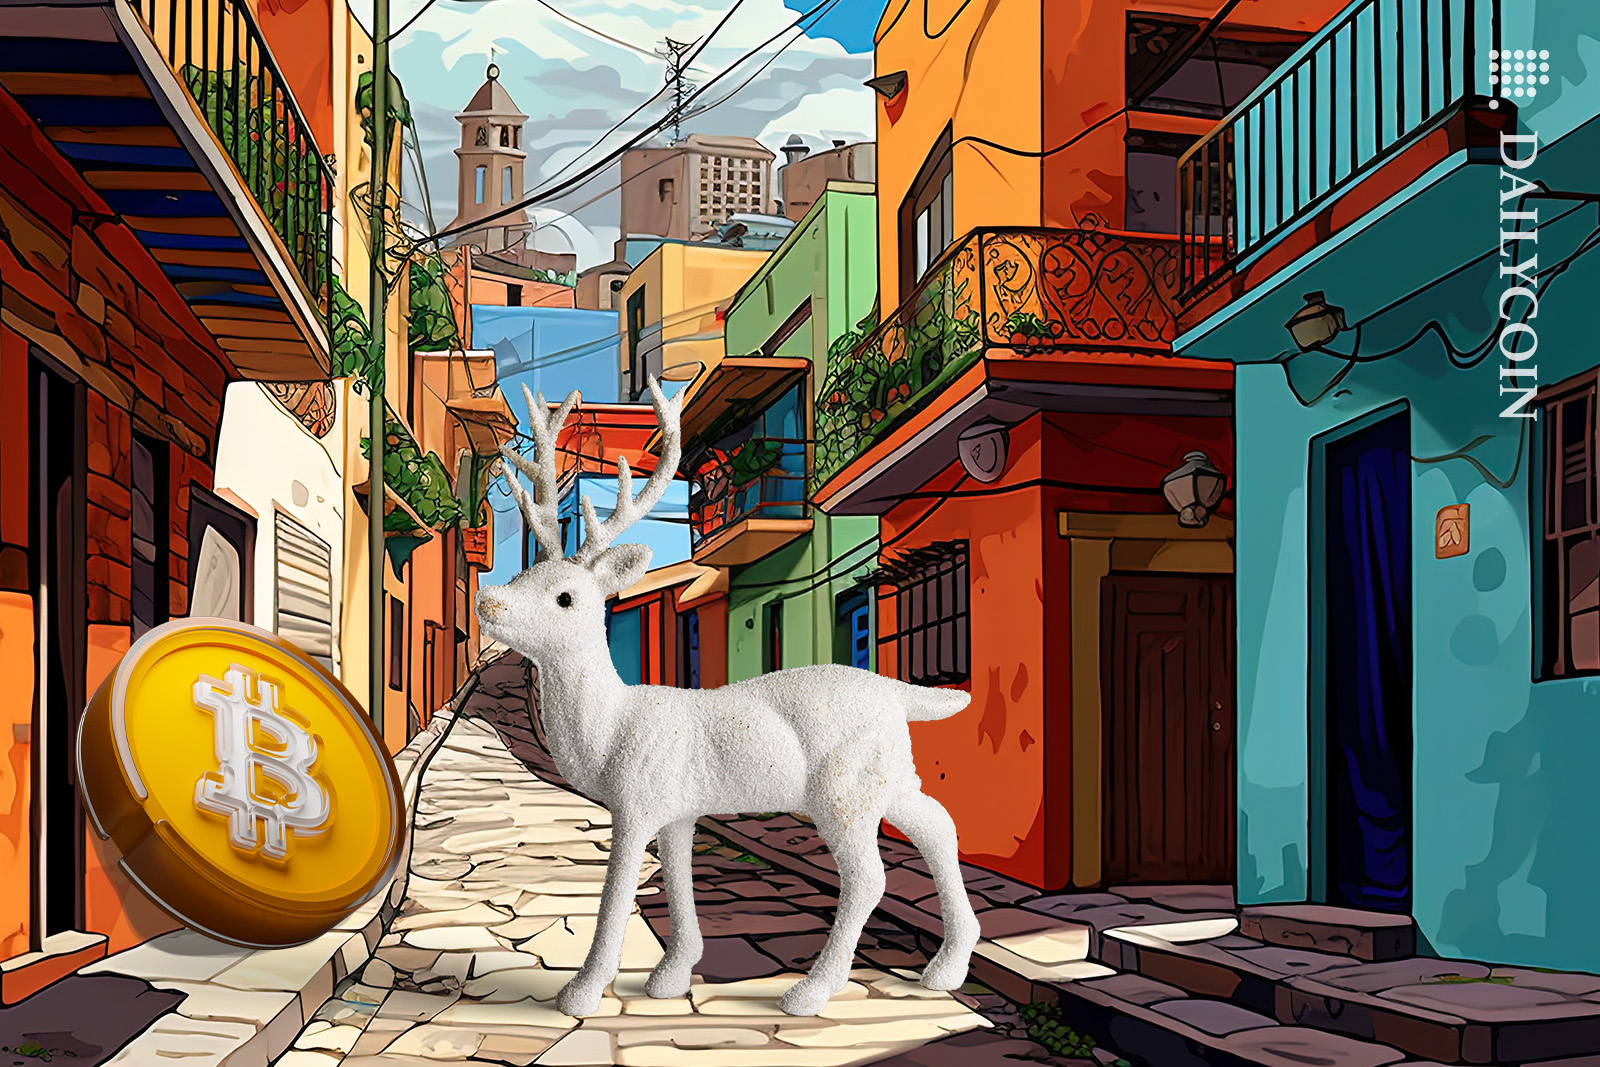 National animal of Honduras - the yucatan white-tailed deer is walking around the town and spotted a Bitcoin.